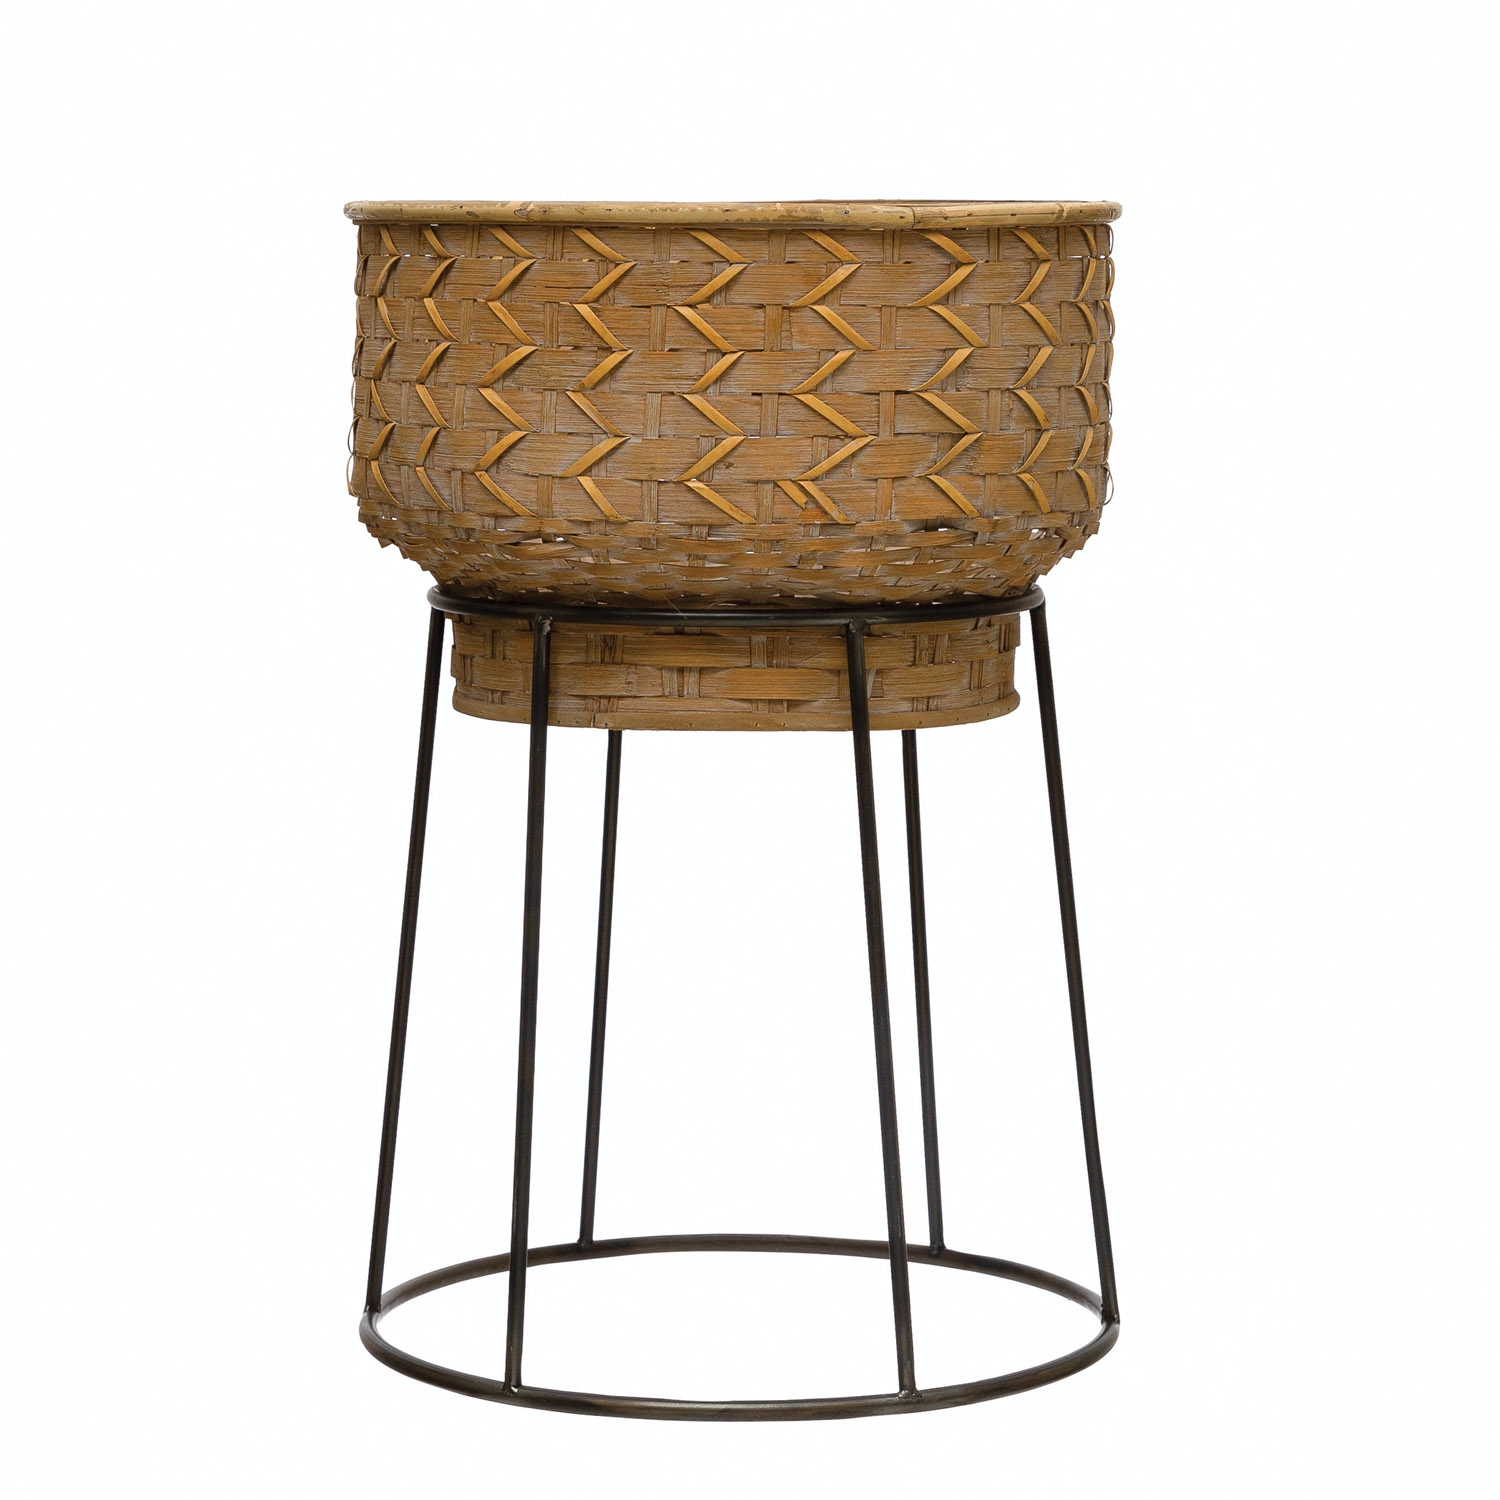 Hand-Woven Rattan Planter with Metal Stand - Image 0